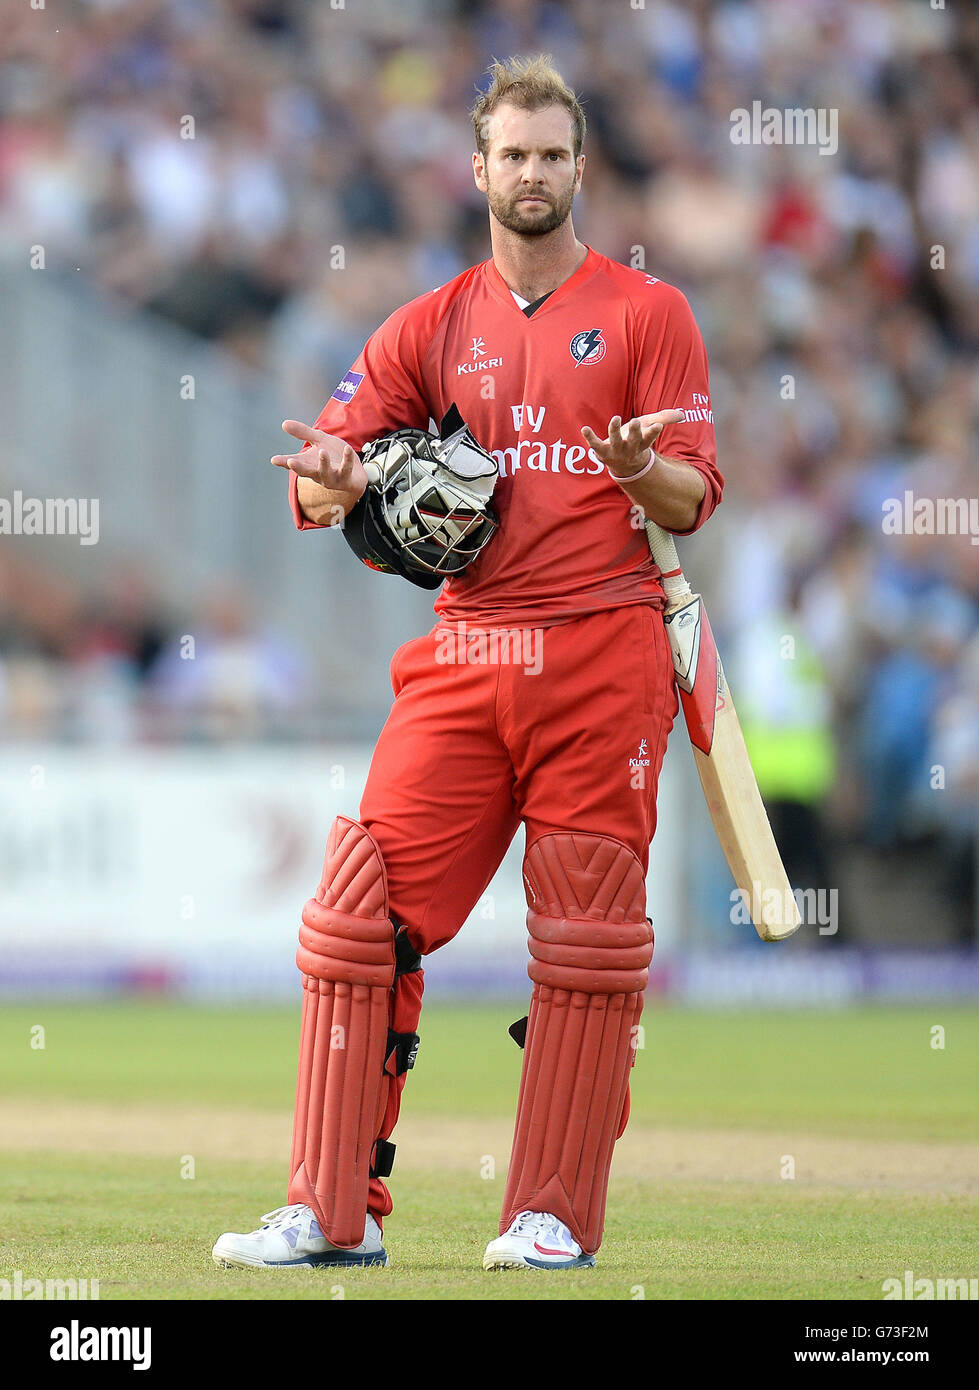 Lancashire Lightning's Tom Smith waits for the 3rd umpires verdict after being caught out by Yorkshire Vikings Aaron Finch after Adam Lyth threw the ball back while falling over the boundary rope, during the NatWest T20 Blast match at Emirates Old Trafford, Manchester. Stock Photo